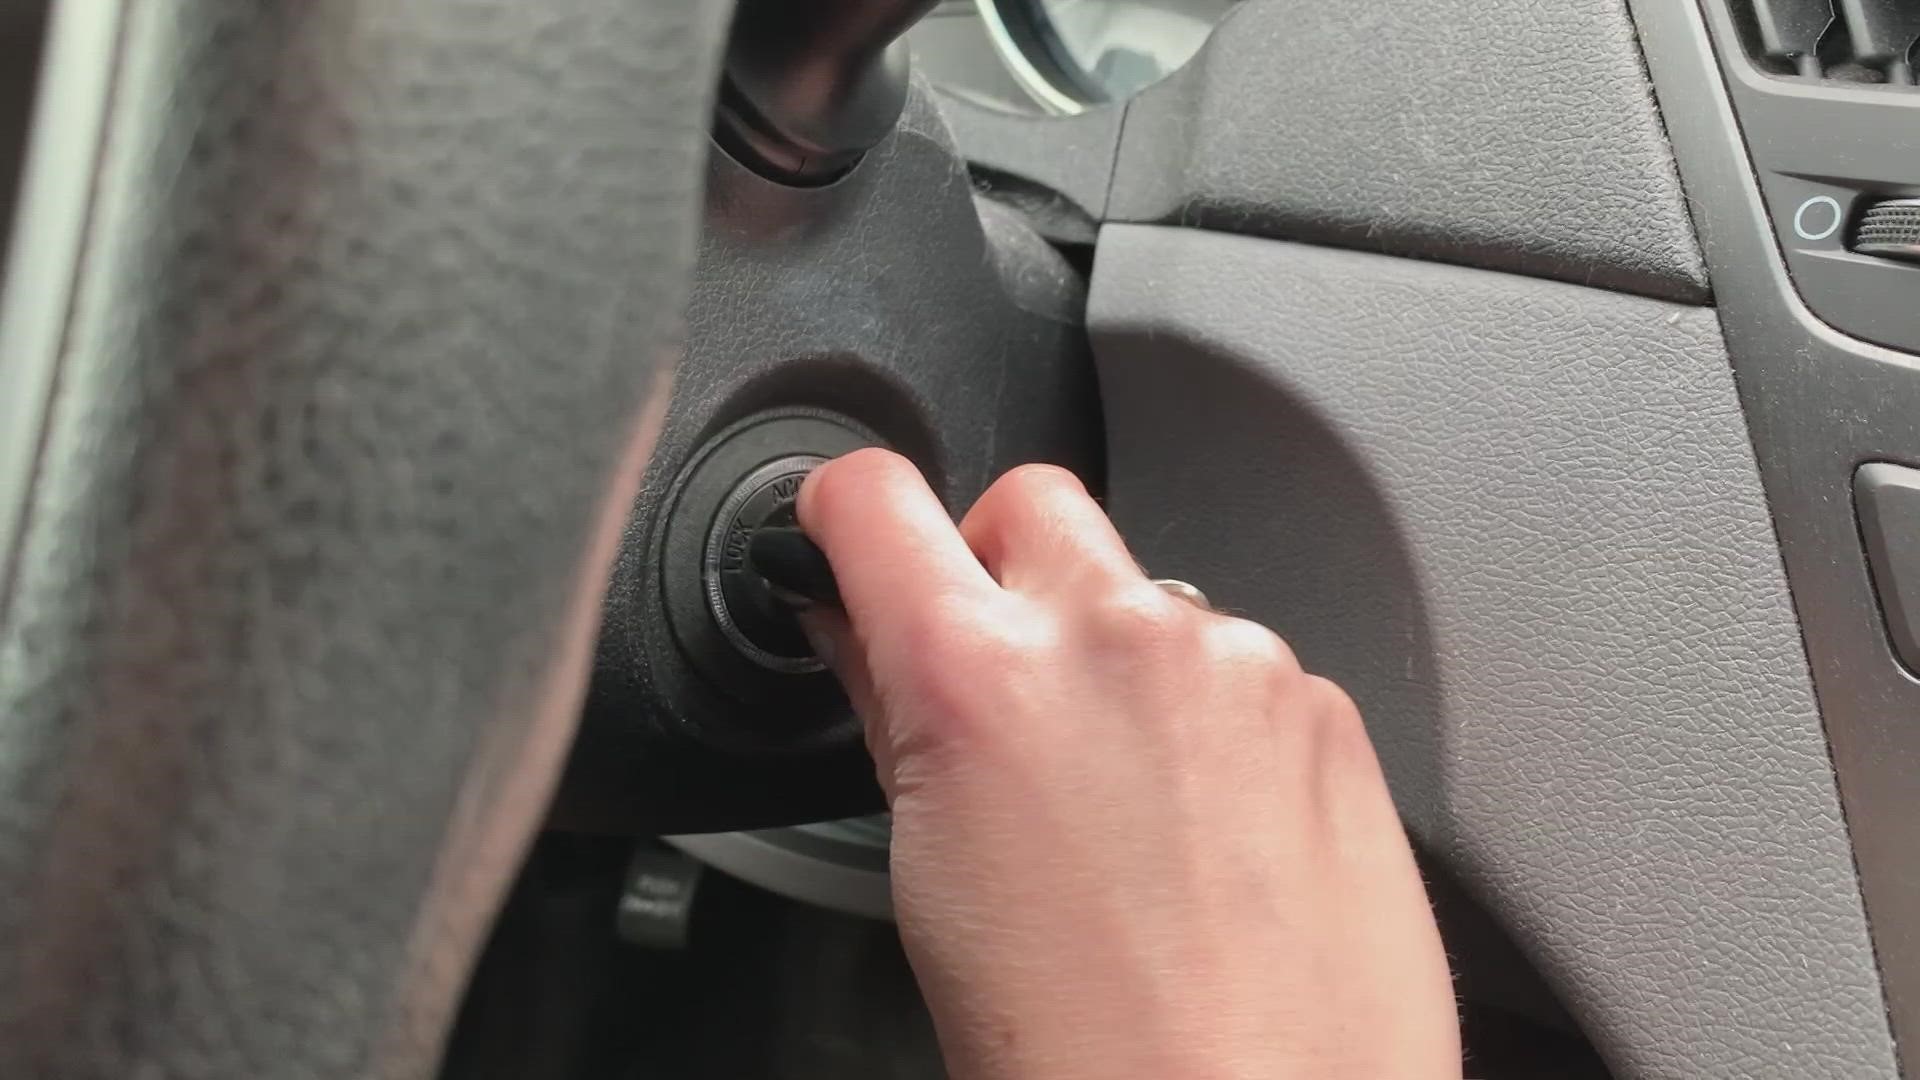 Kia told 13News vehicles being targeted by this crime wave are from 2011 to 2021 that use a steel key and "insert/turn-to-start" ignition systems.